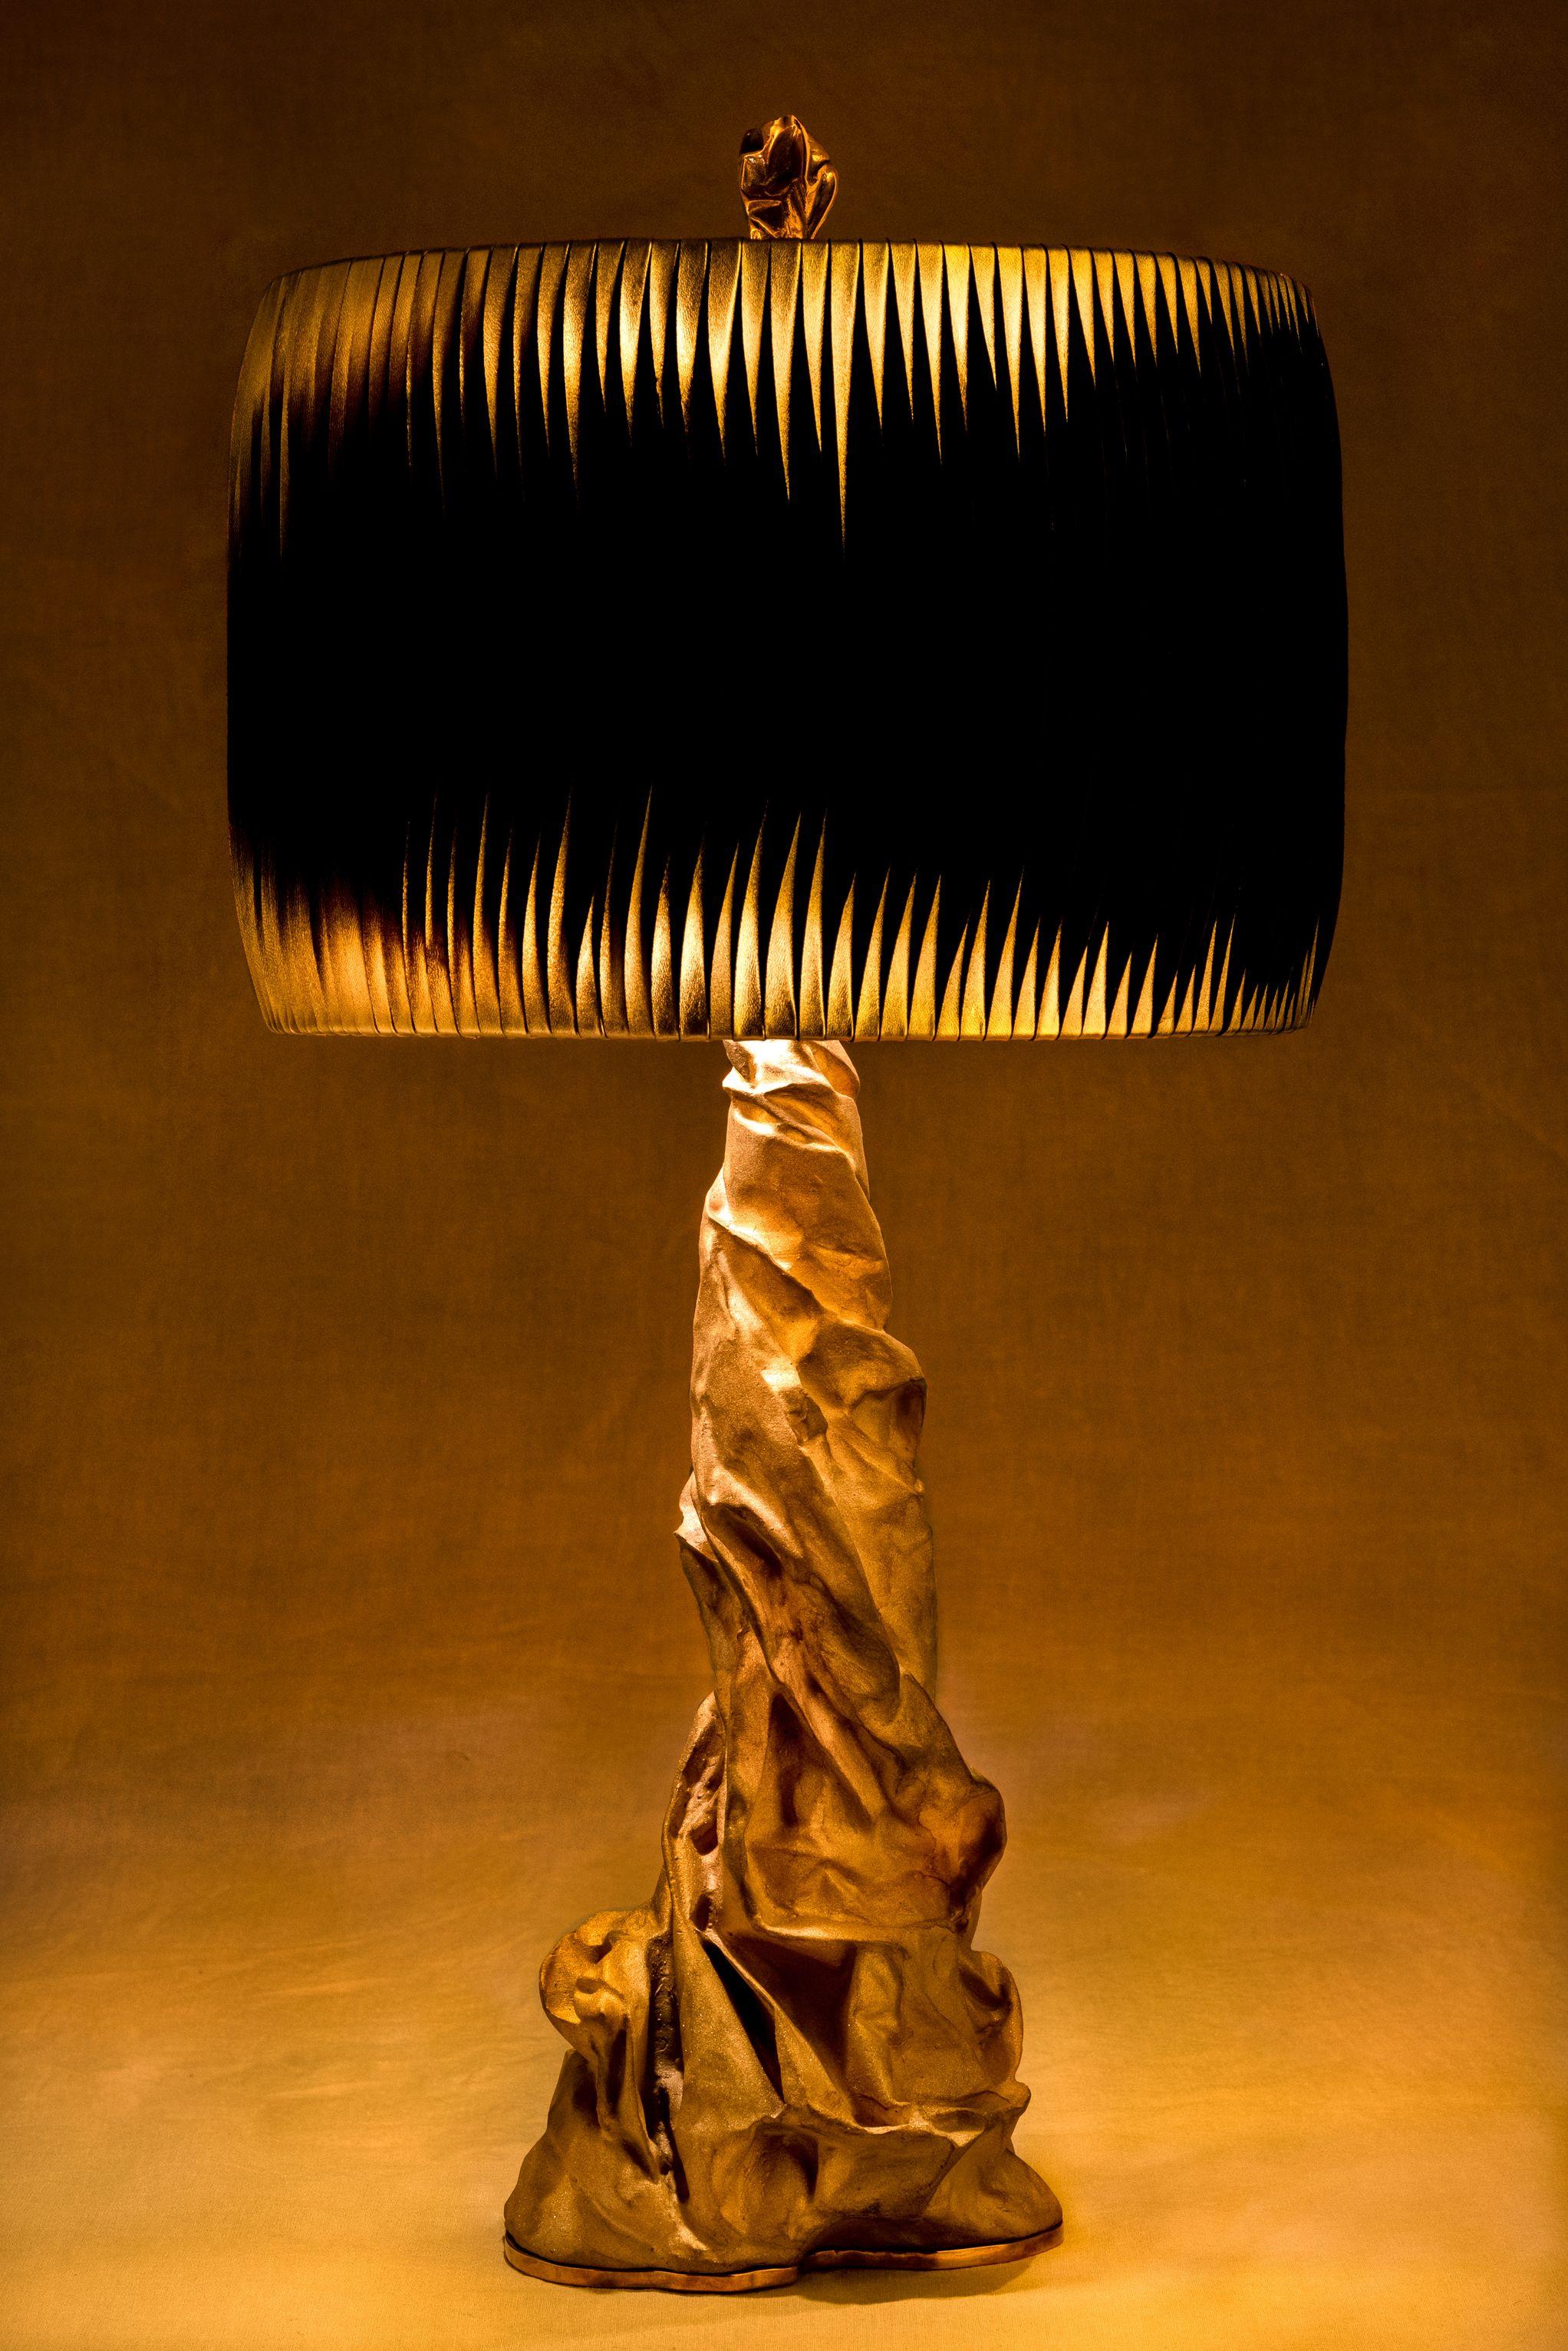 Charta aura table lamp by Studio Palatin
Handcrafted, limited edition
Dimensions: H 75 x D 35 cm
Materials: bronze light, 24K gilding, leather black/gold.

Charta Nera is the dark, mysterious cousin to the Charta Alba table lamp. The lamp base